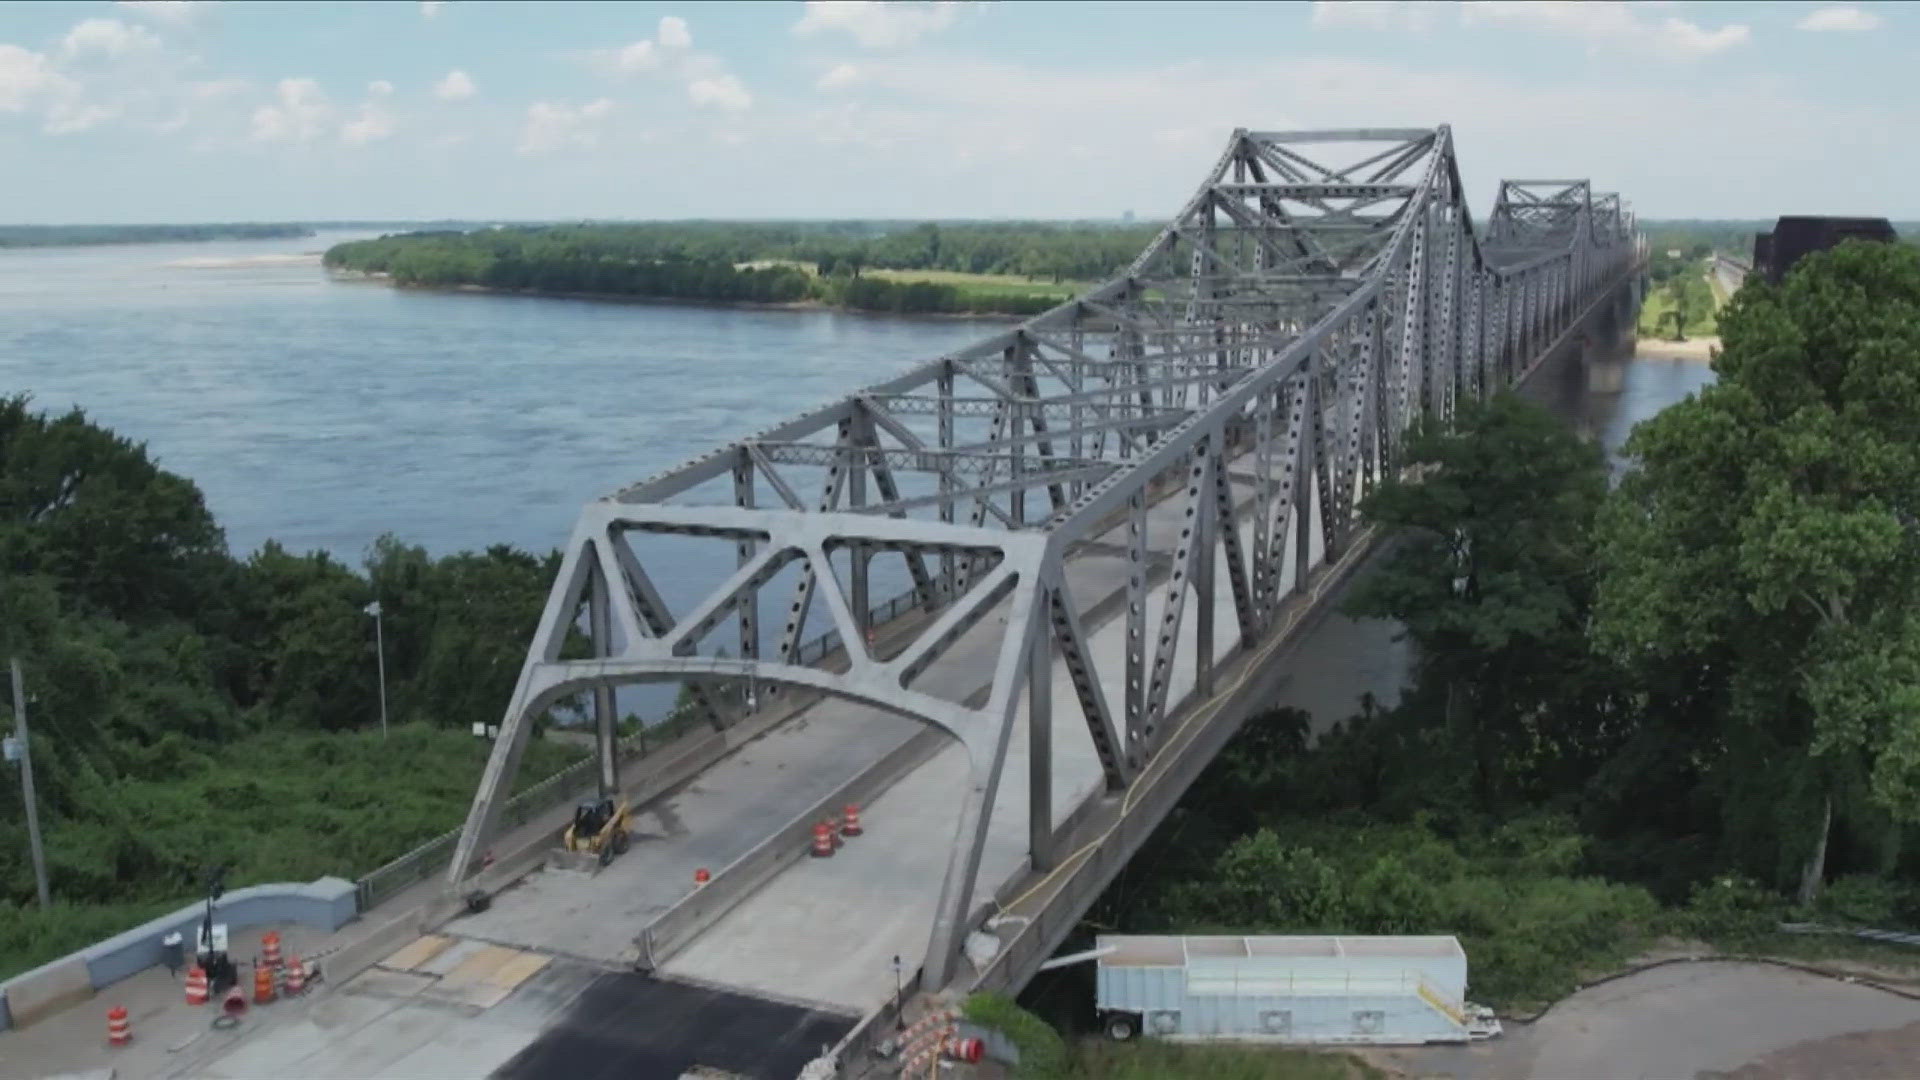 TDOT said crews are doing hydro-demolition and deck repair work on the bridge.